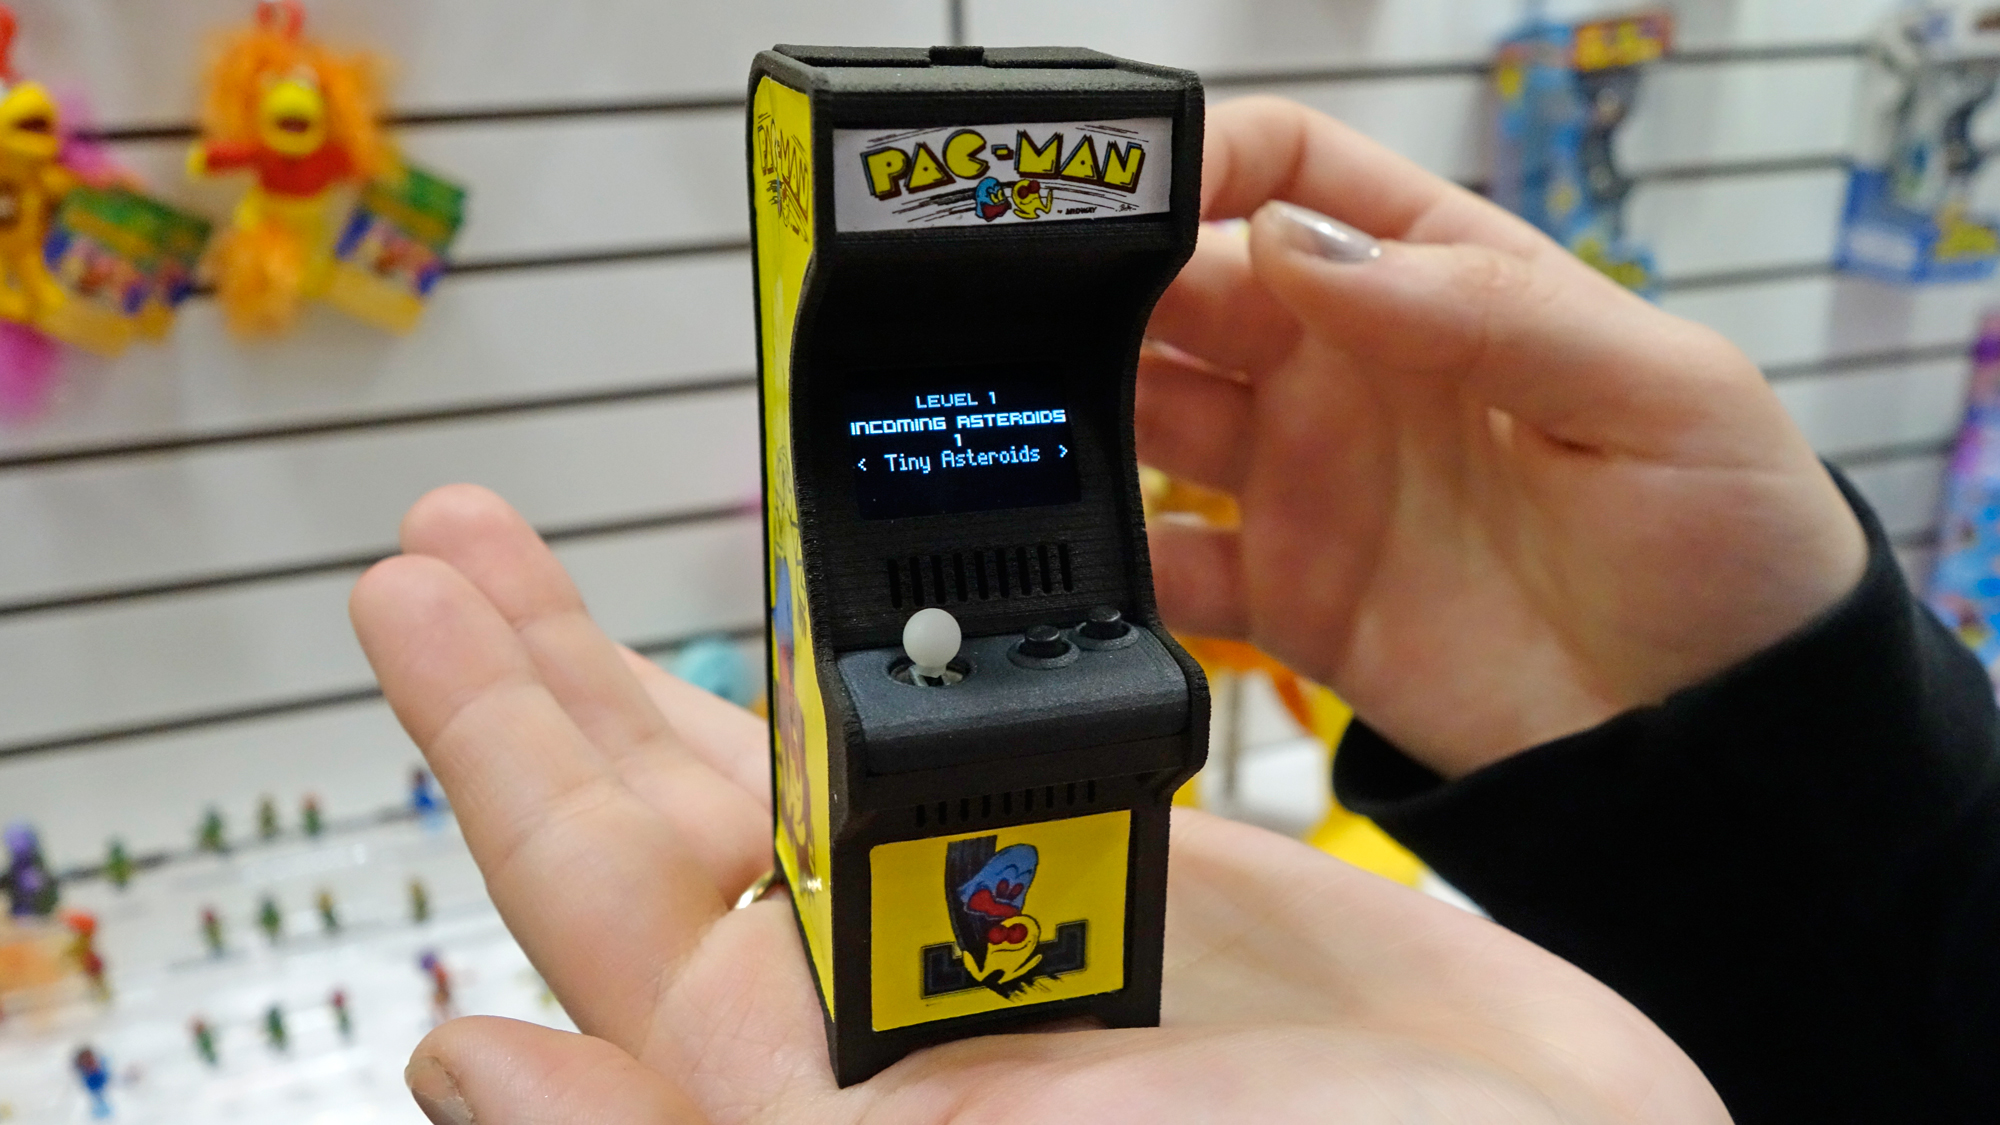 Playing Retro Games On These Tiny Arcade Cabinets Is Still More Fun Than On A Smartphone